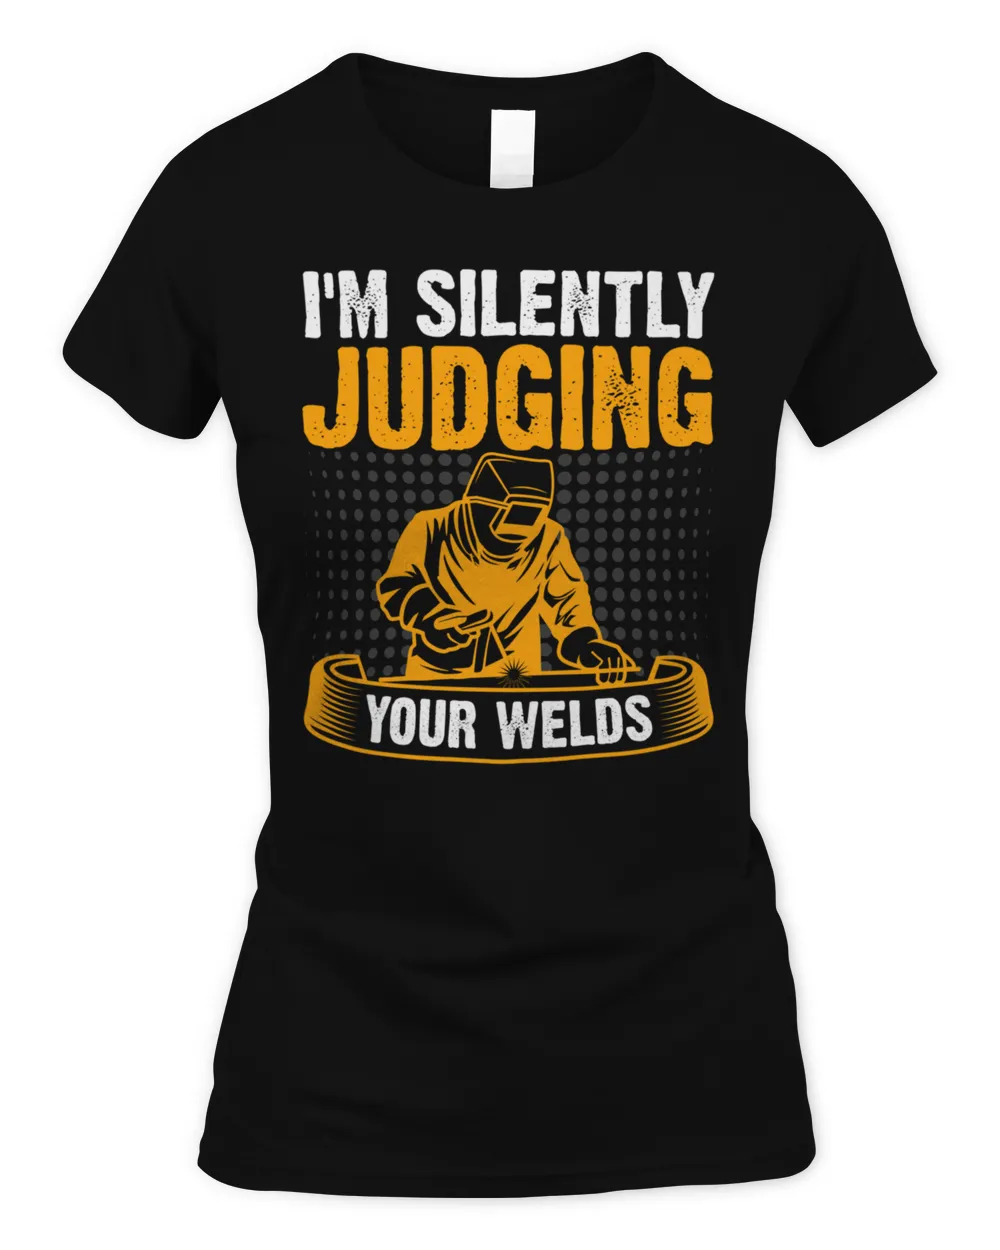 I'm Silently Judging Your Welds - Funny T-Shirt